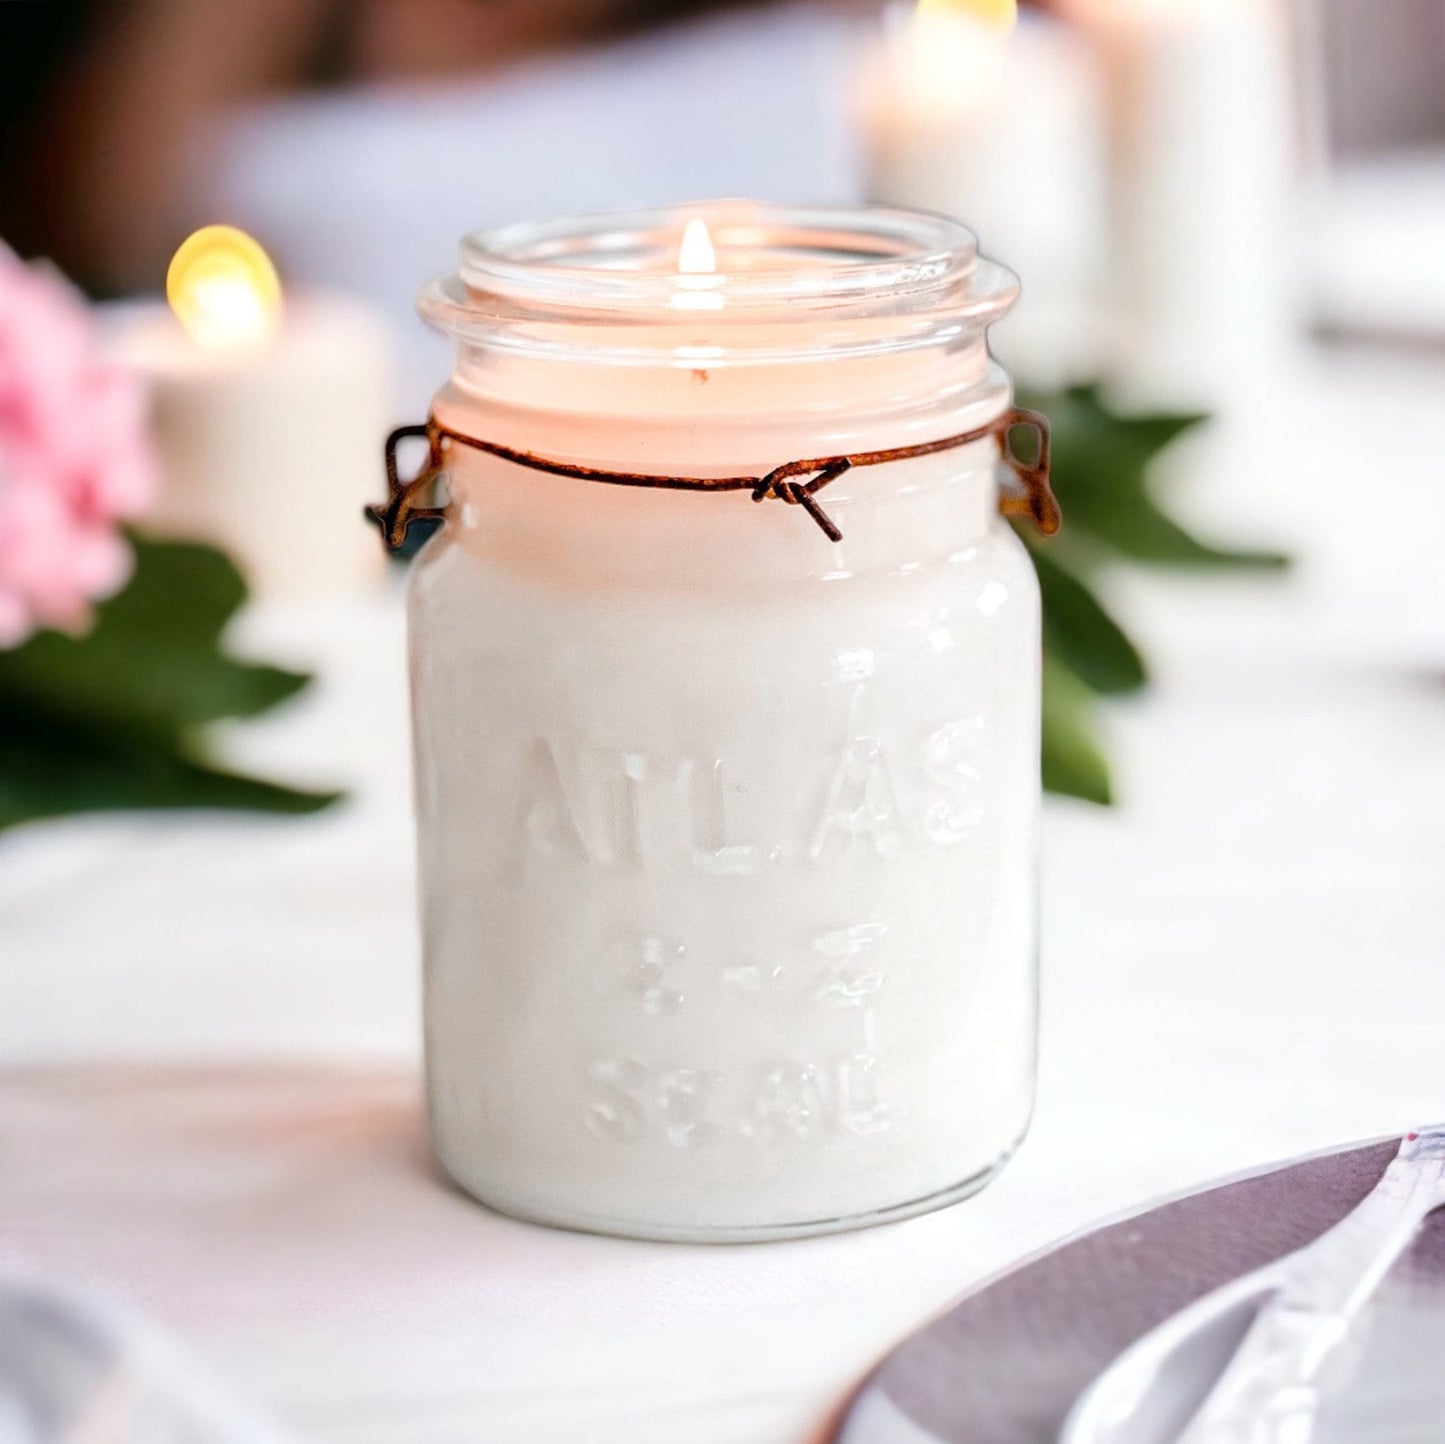 Scented Soy Candle in Vintage Mason Jar